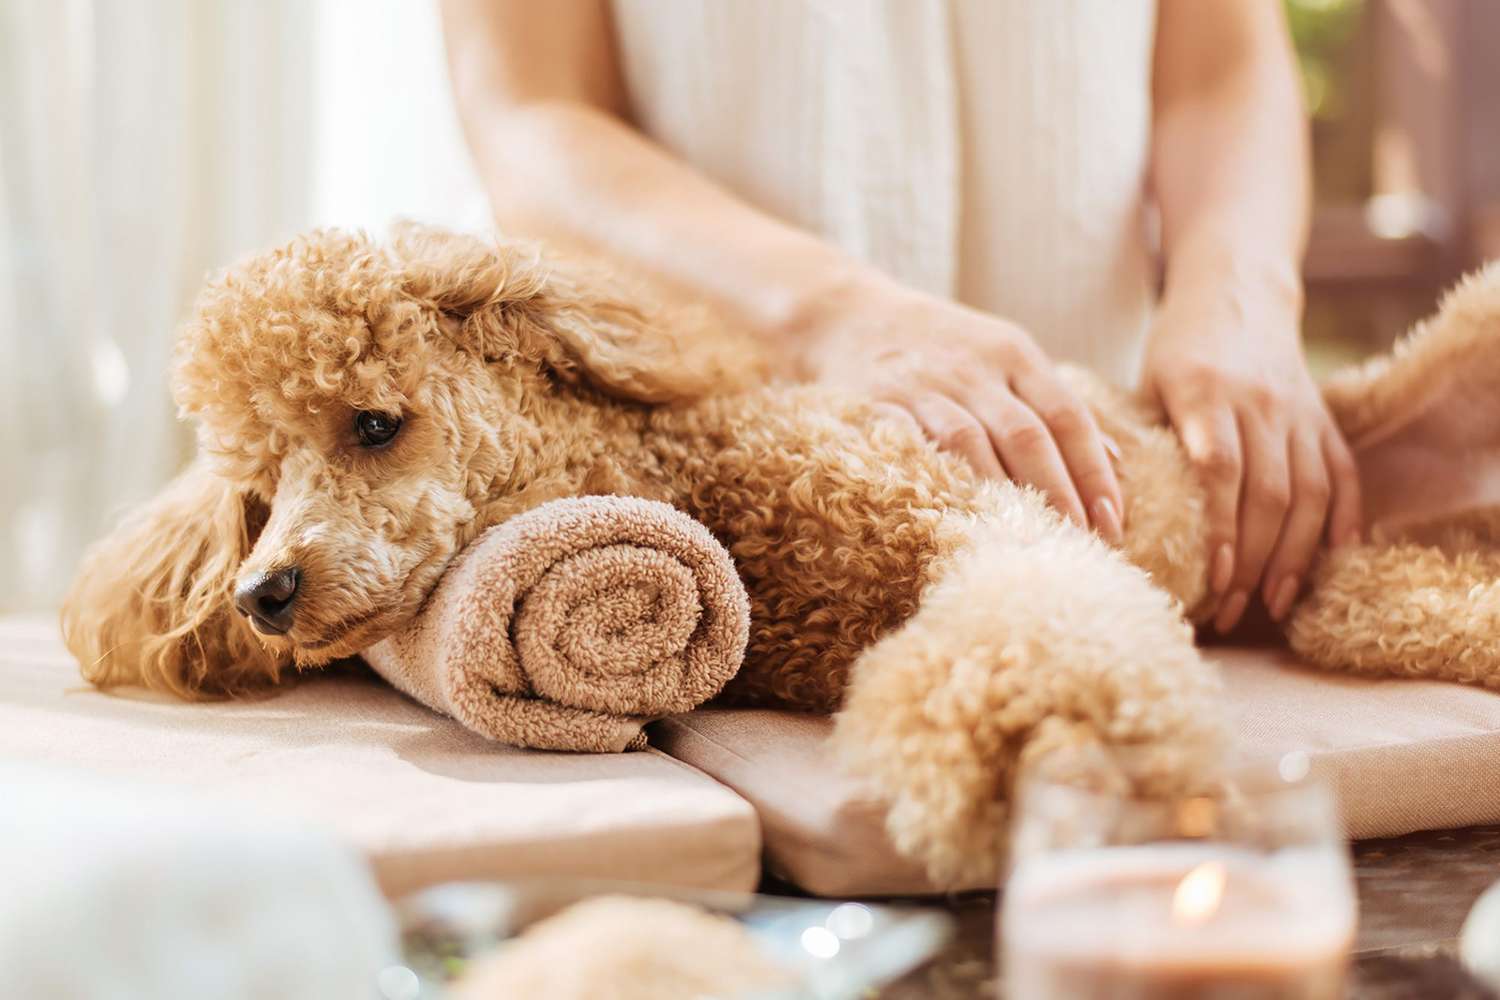 How to Massage a Dog: Tips and Tricks from a Pro | Daily Paws